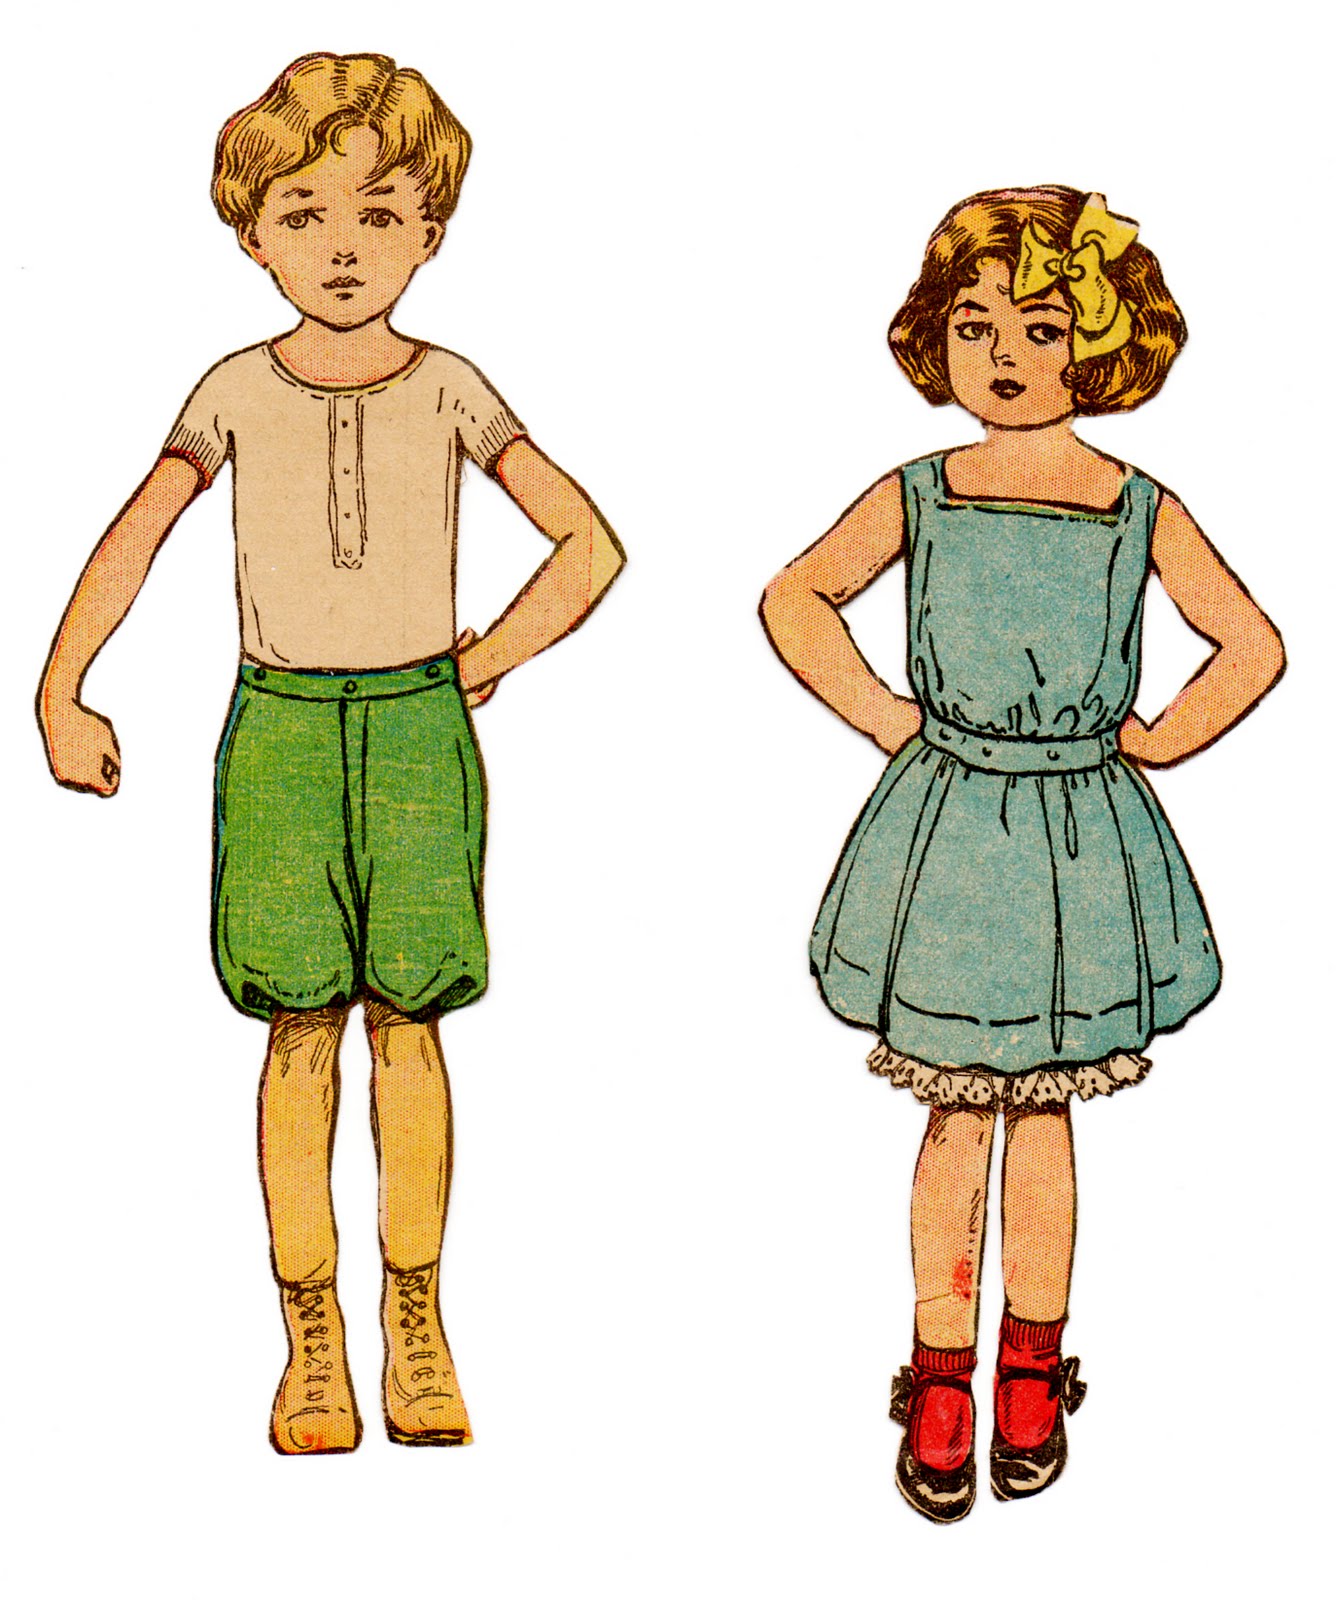 Kids Summer Clothes Clipart   Clipart Panda   Free Clipart Images